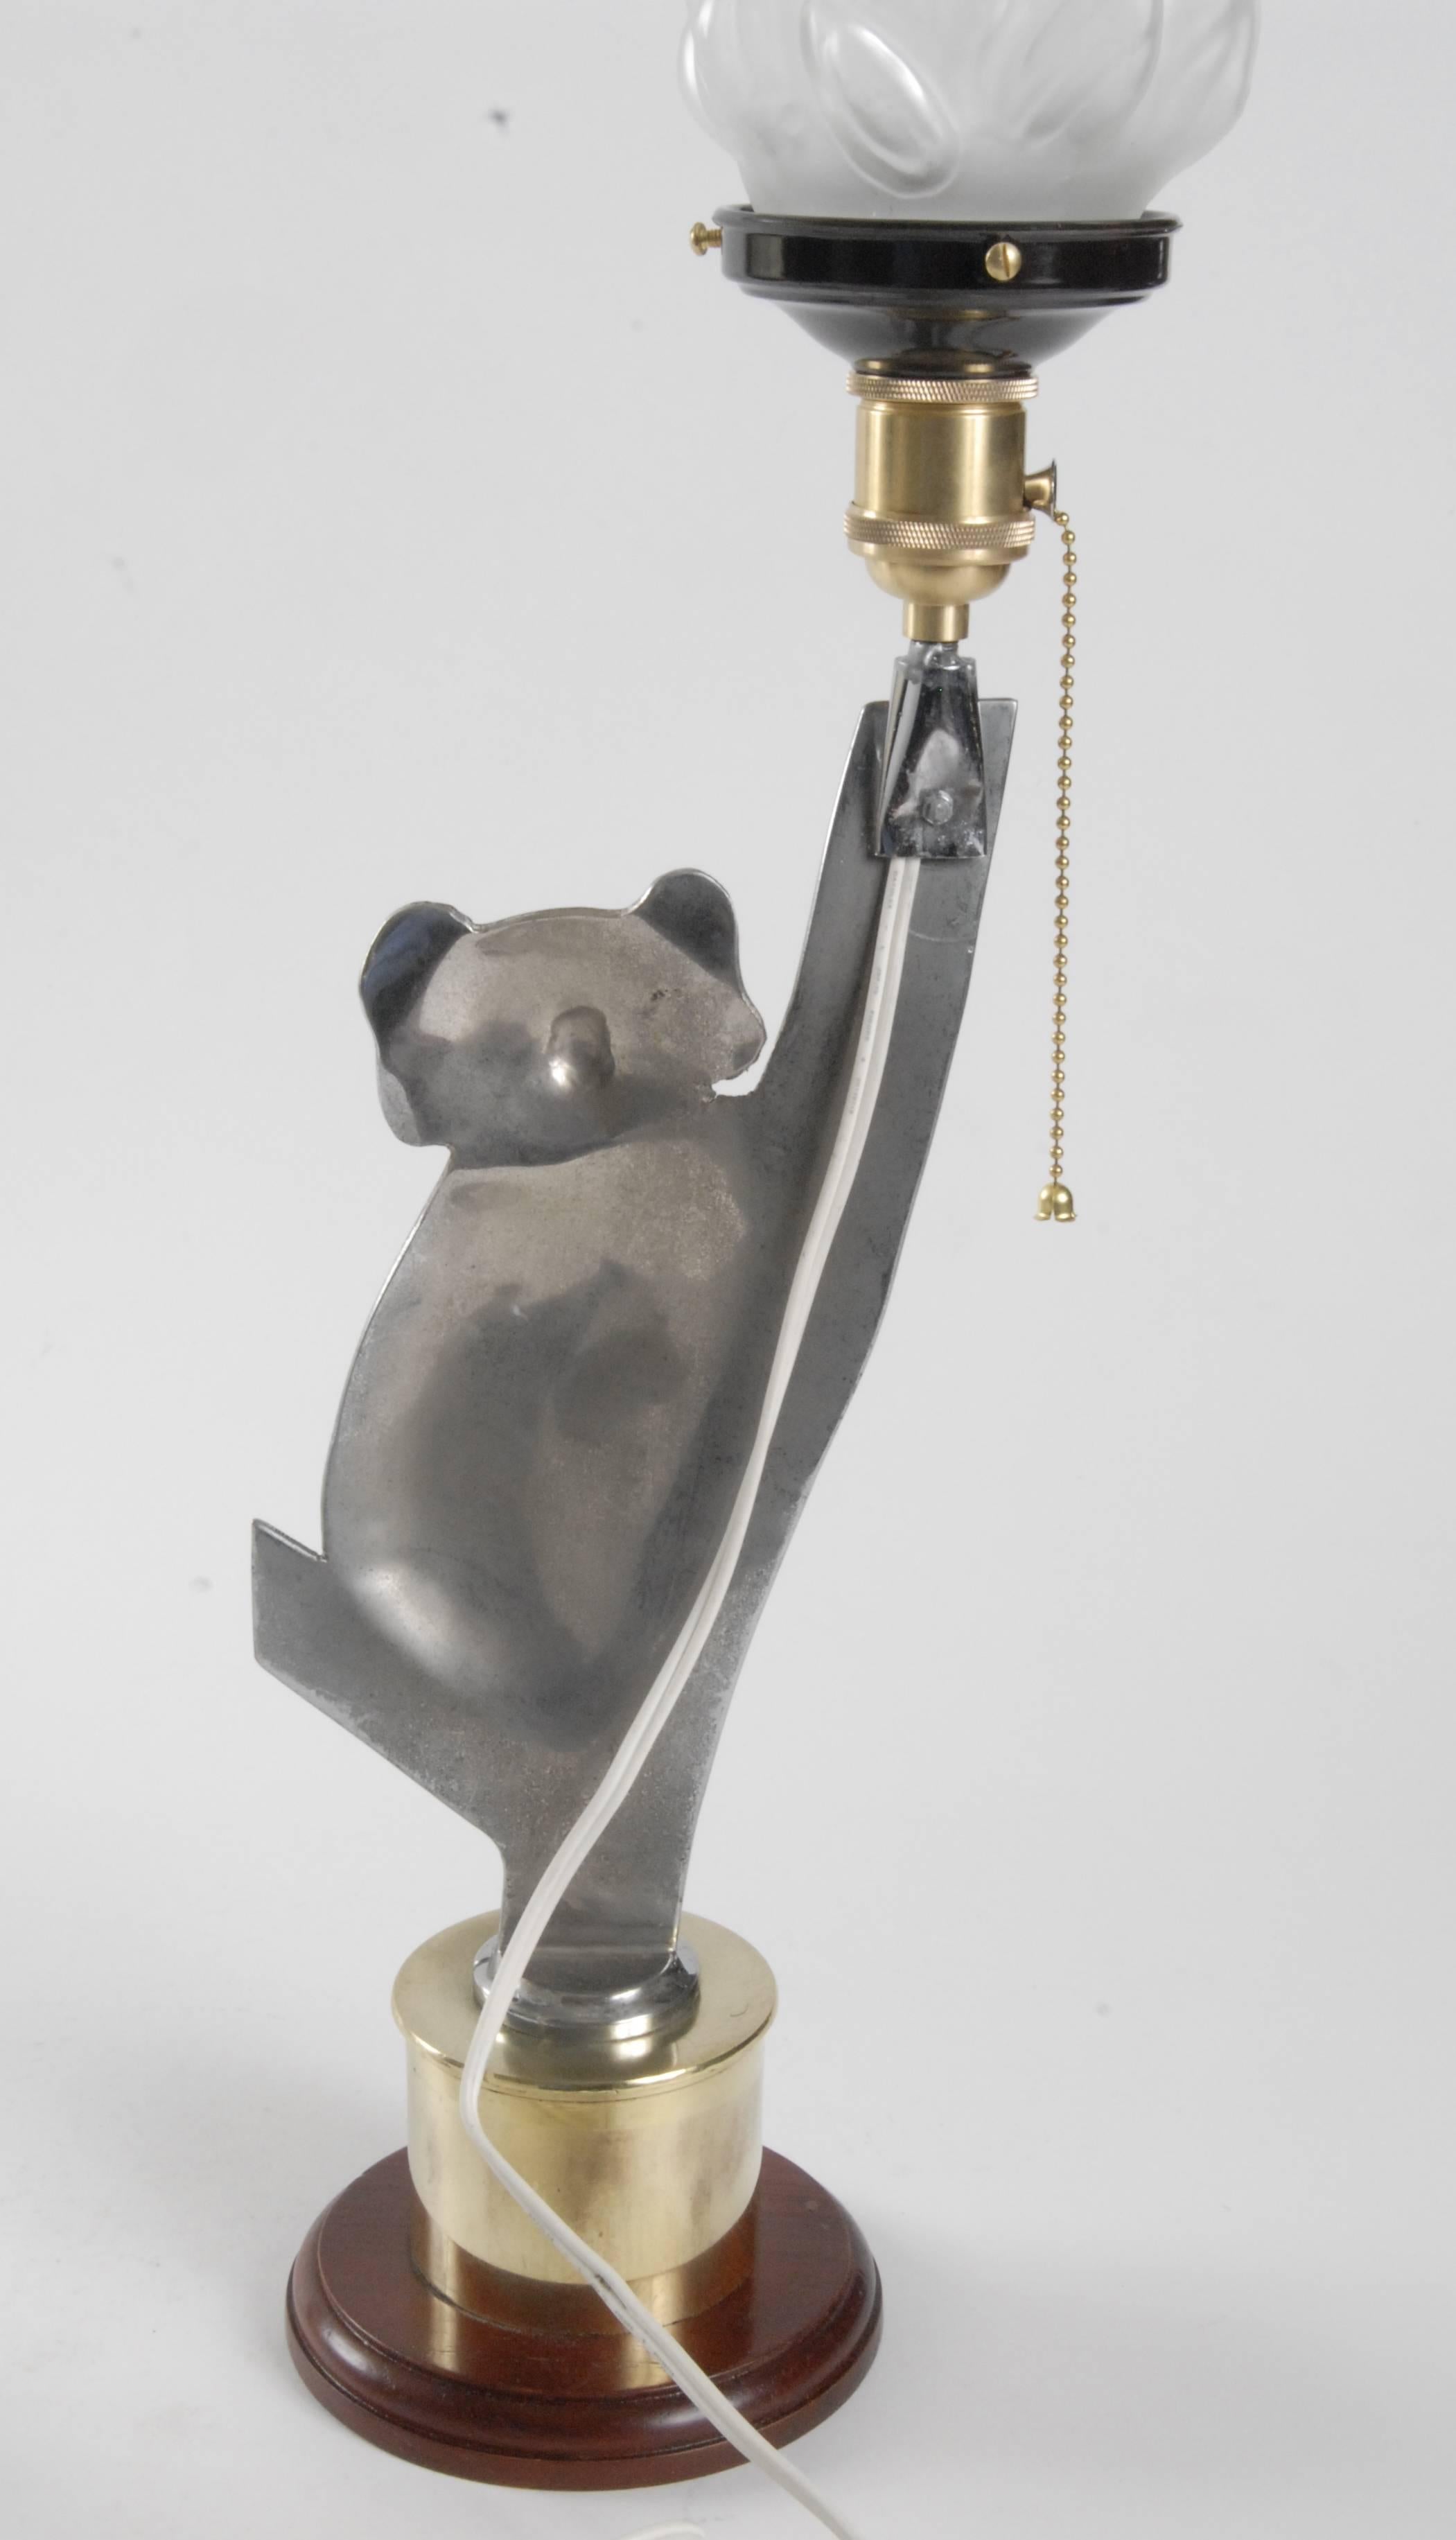 A wonderful pair of trench-art table lamps in the form of a mirror pair of Koalas.
Made from cut mortar shells, nickel plated and hand engraved to a very high standard. Fitted to polished brass shell casing ends and each with the word 'Australia'